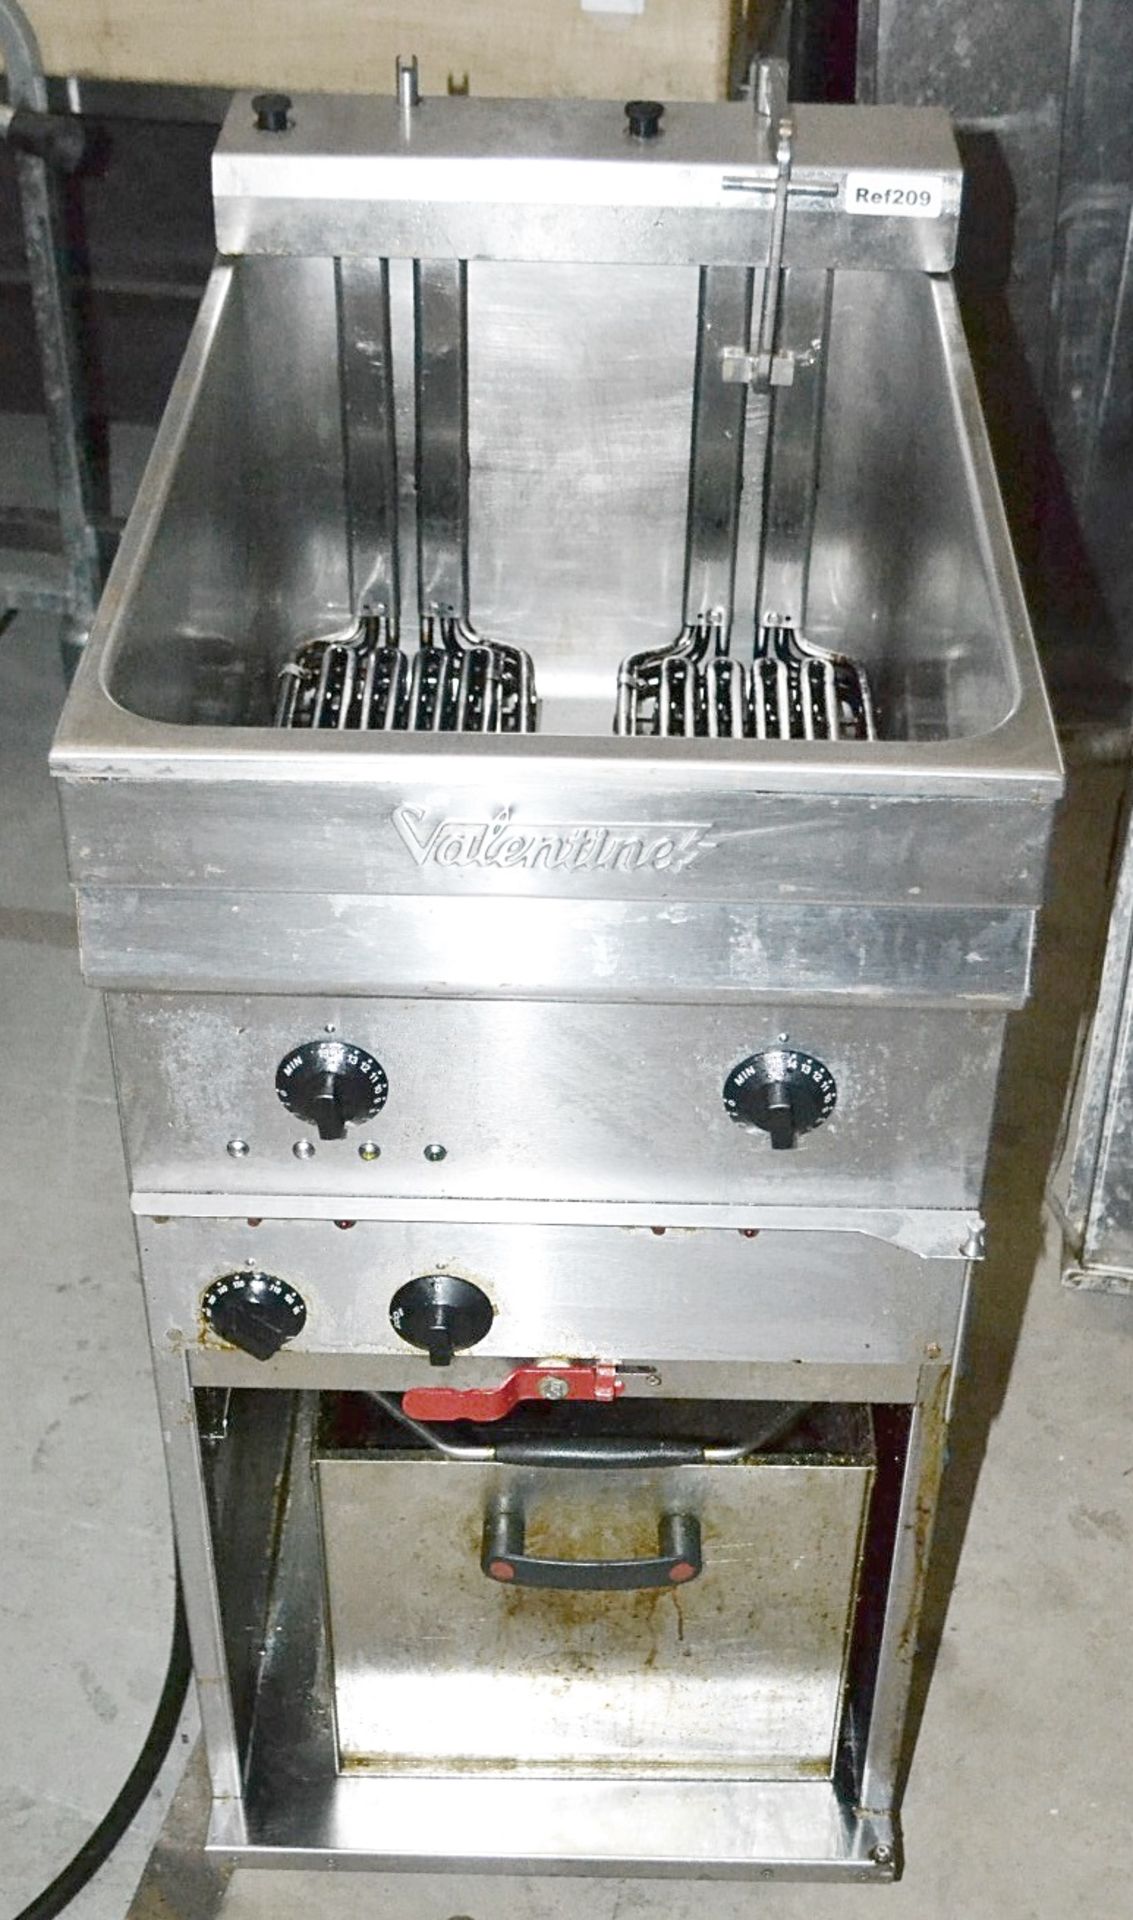 1 x Valentine Freestanding Twin Basket Fryer - Easy Clean Stainless Steel Finish - 15 Litre Capacity - Image 4 of 4